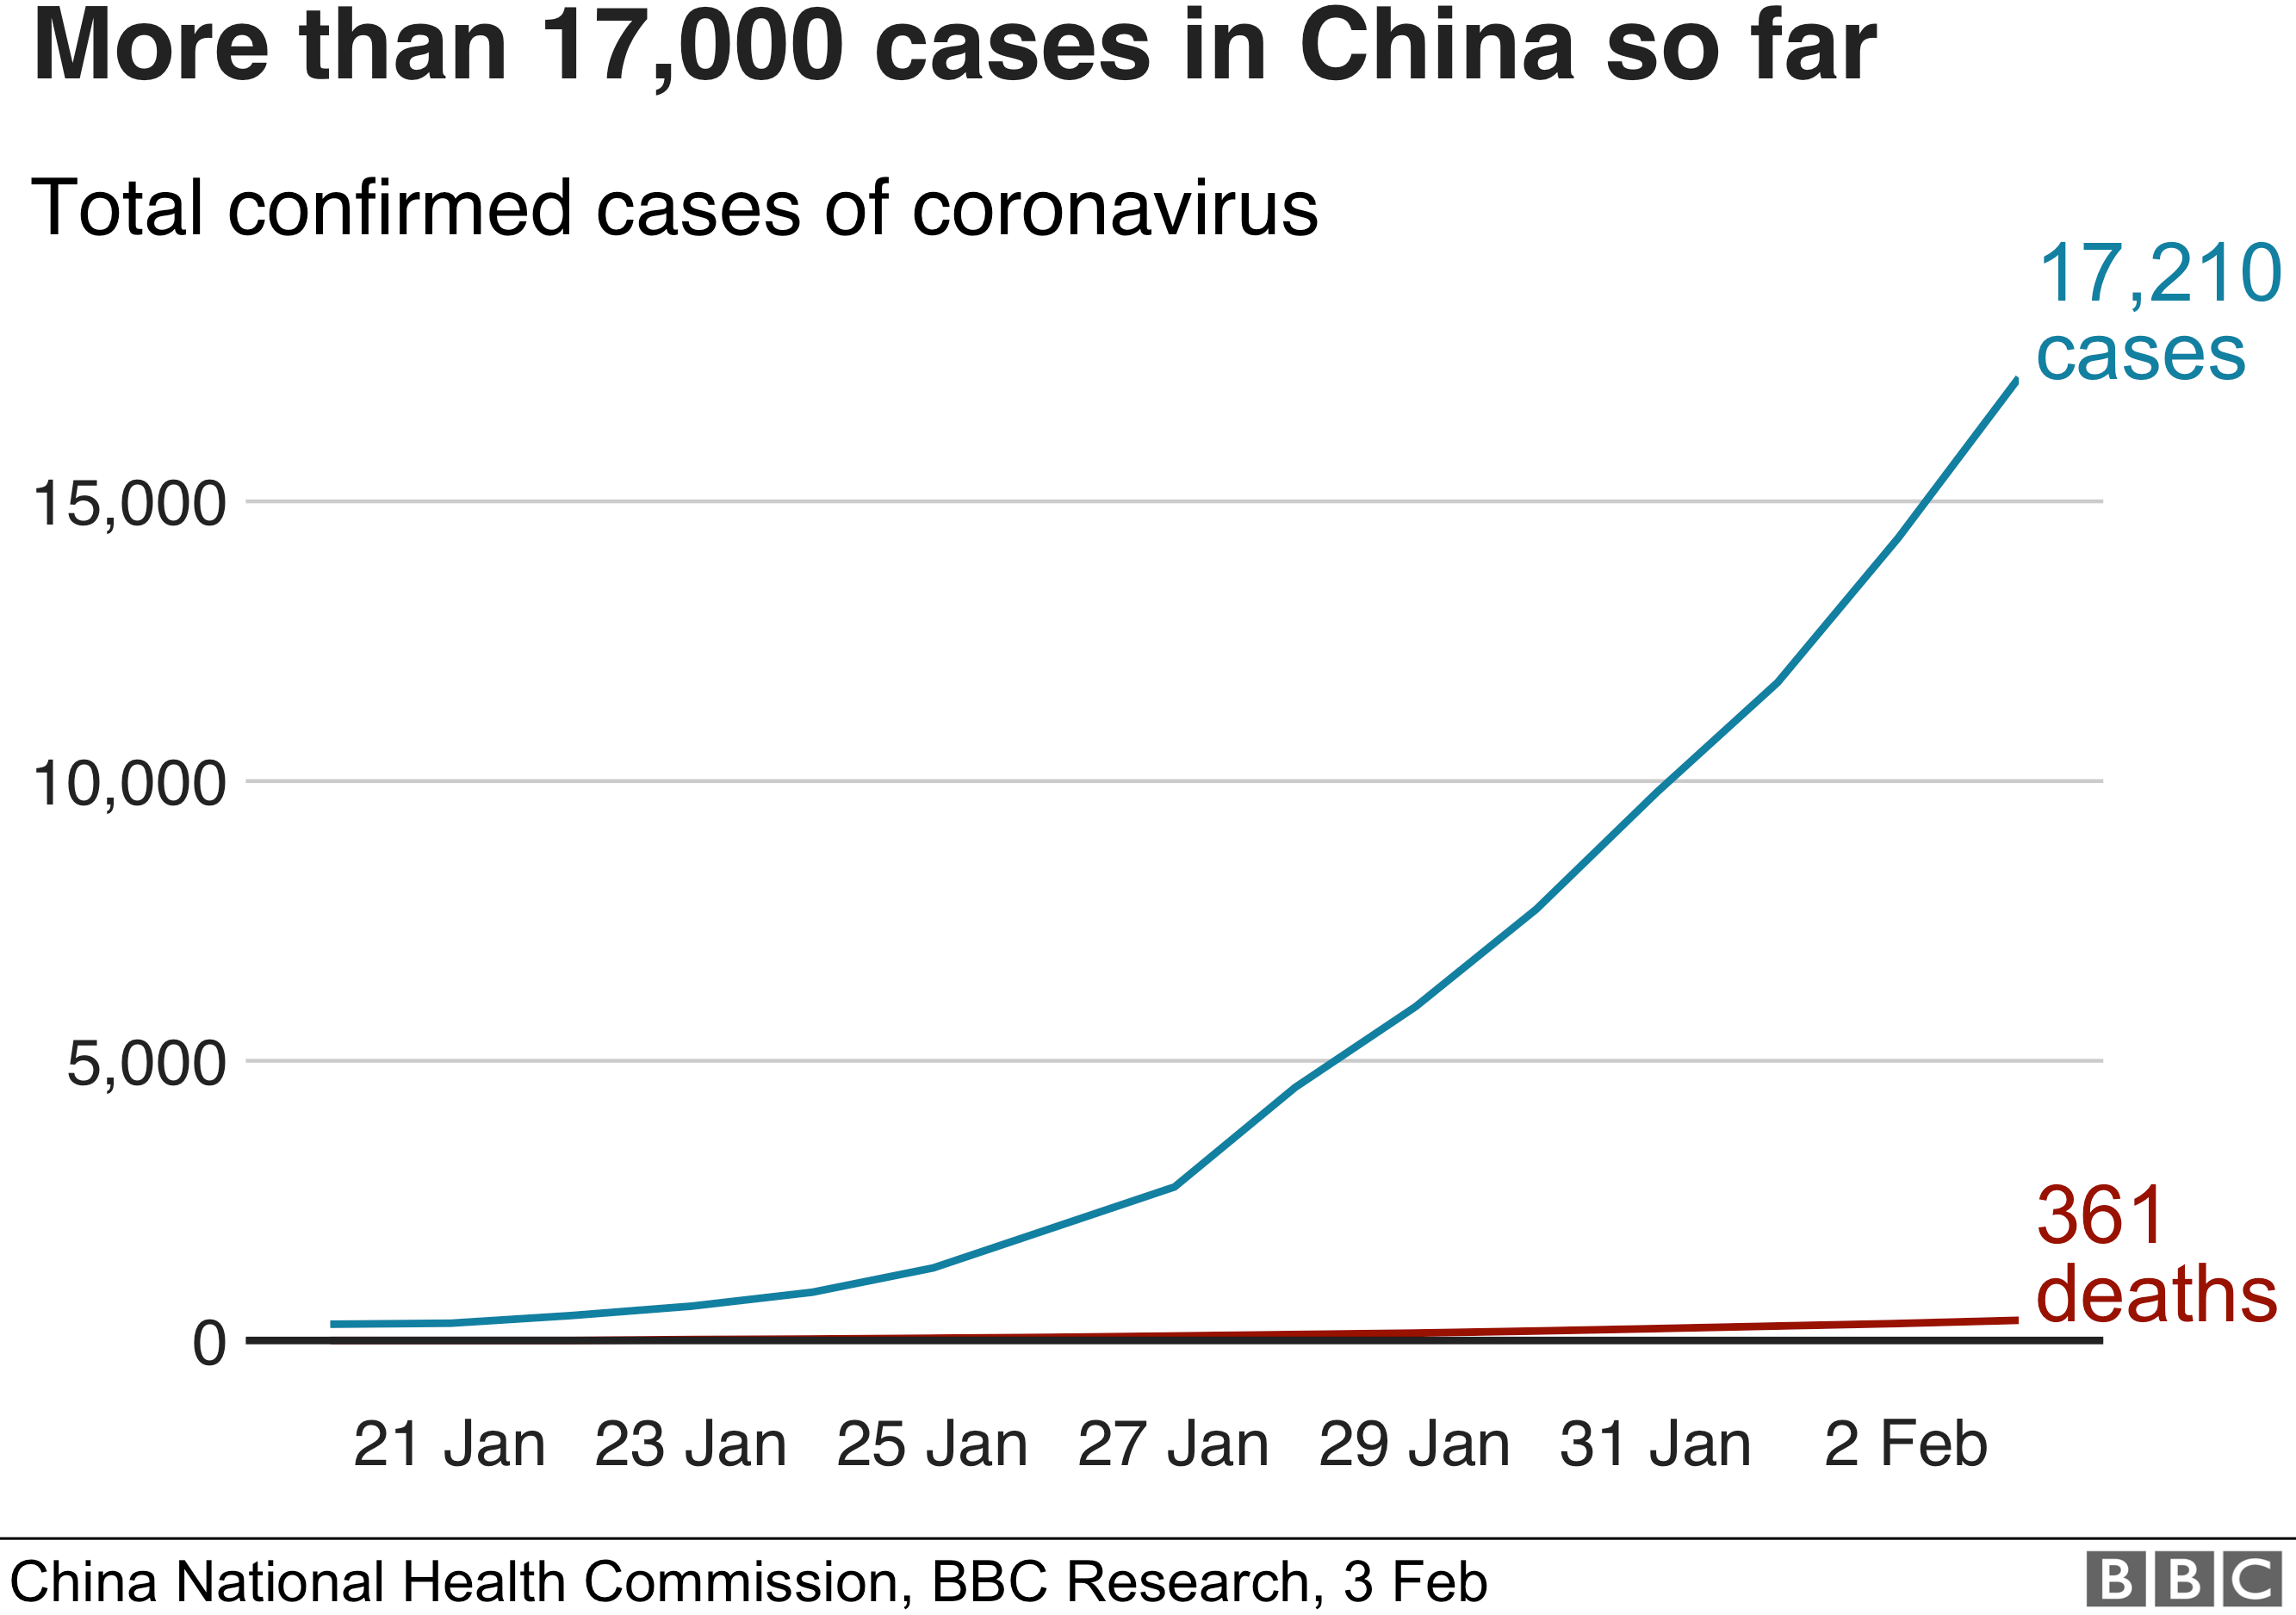 Cases in China are now over 17000. There have been 361 deaths